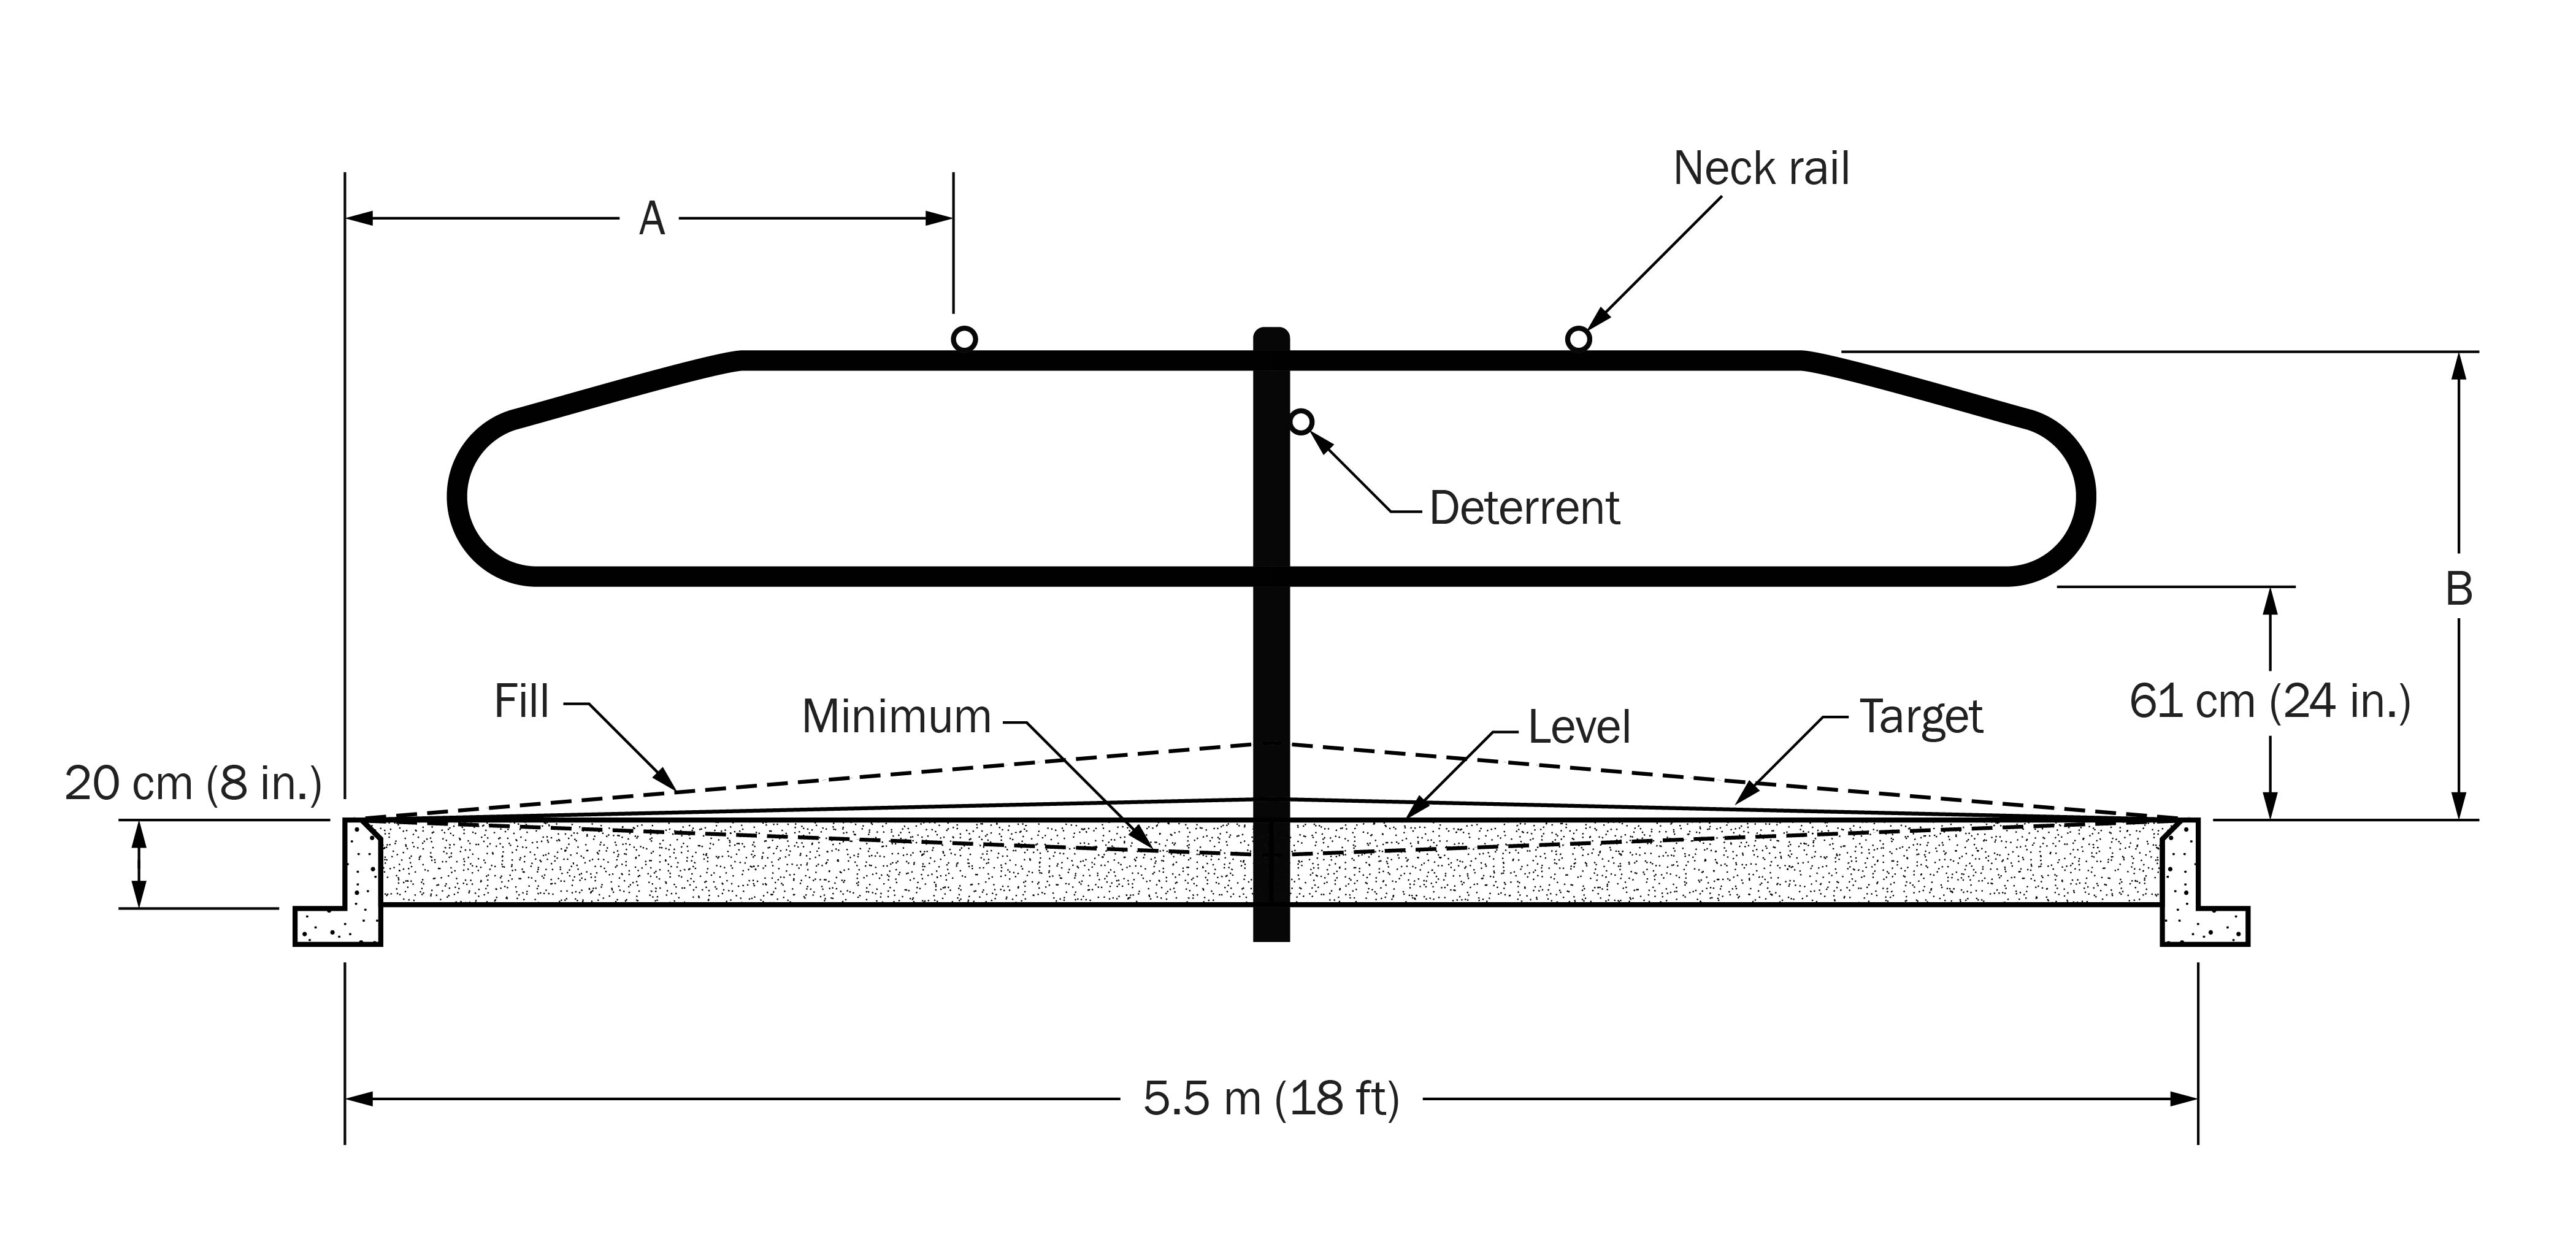 Schematic diagram showing design requirements for free-stall deep-bedded sand and deep-bedded compost bedding.